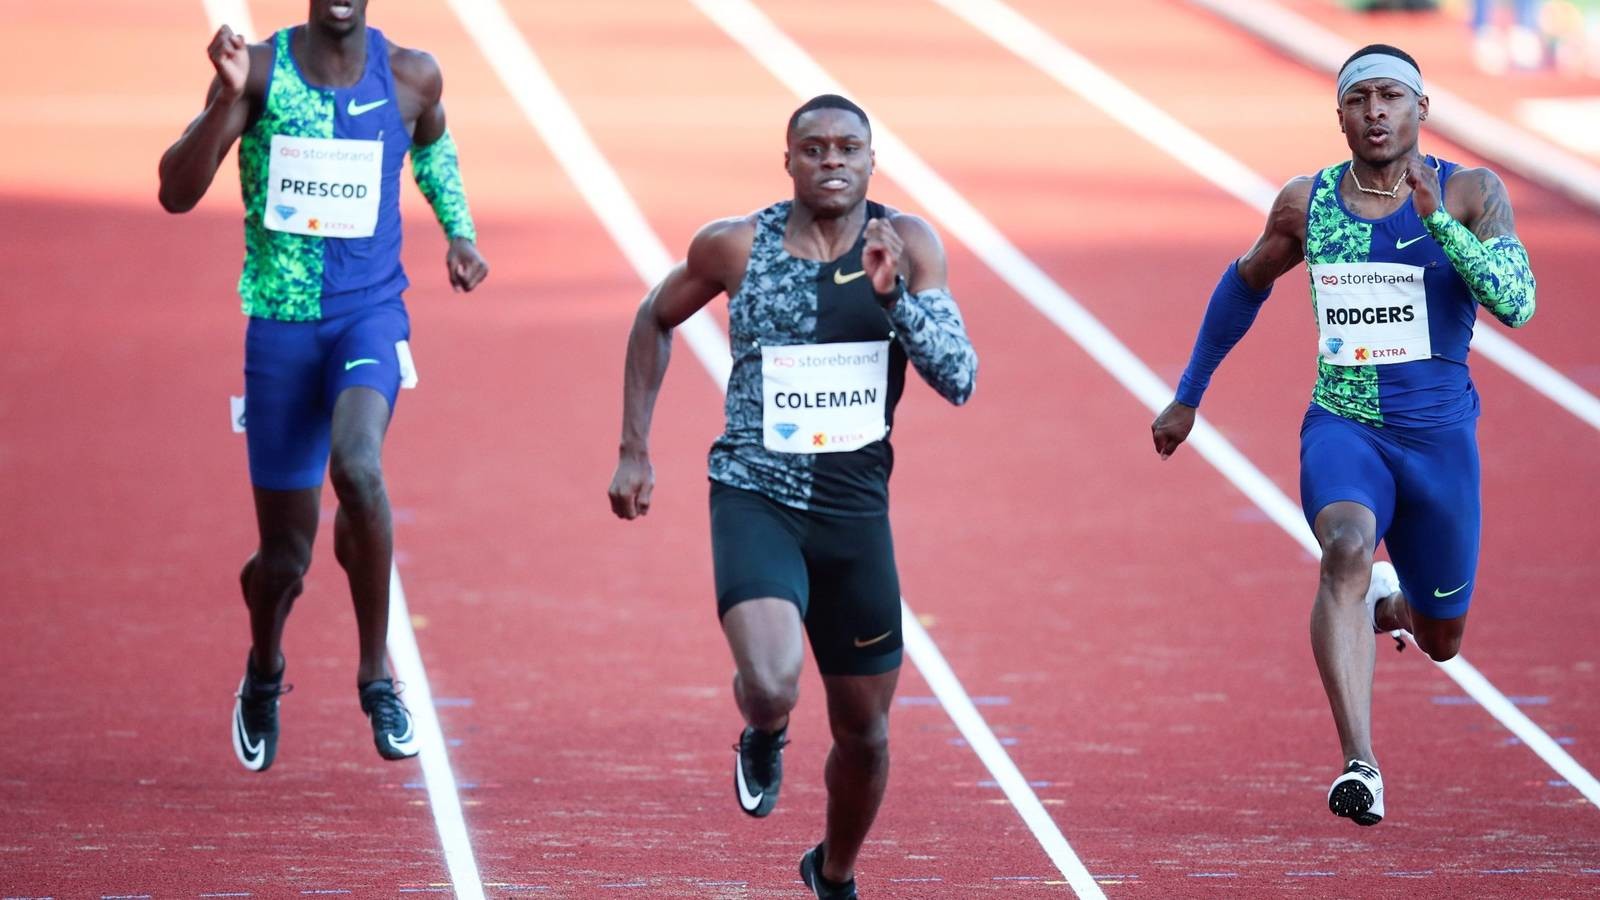 World 100m champion Christian Coleman has two-year ban reduced by six months